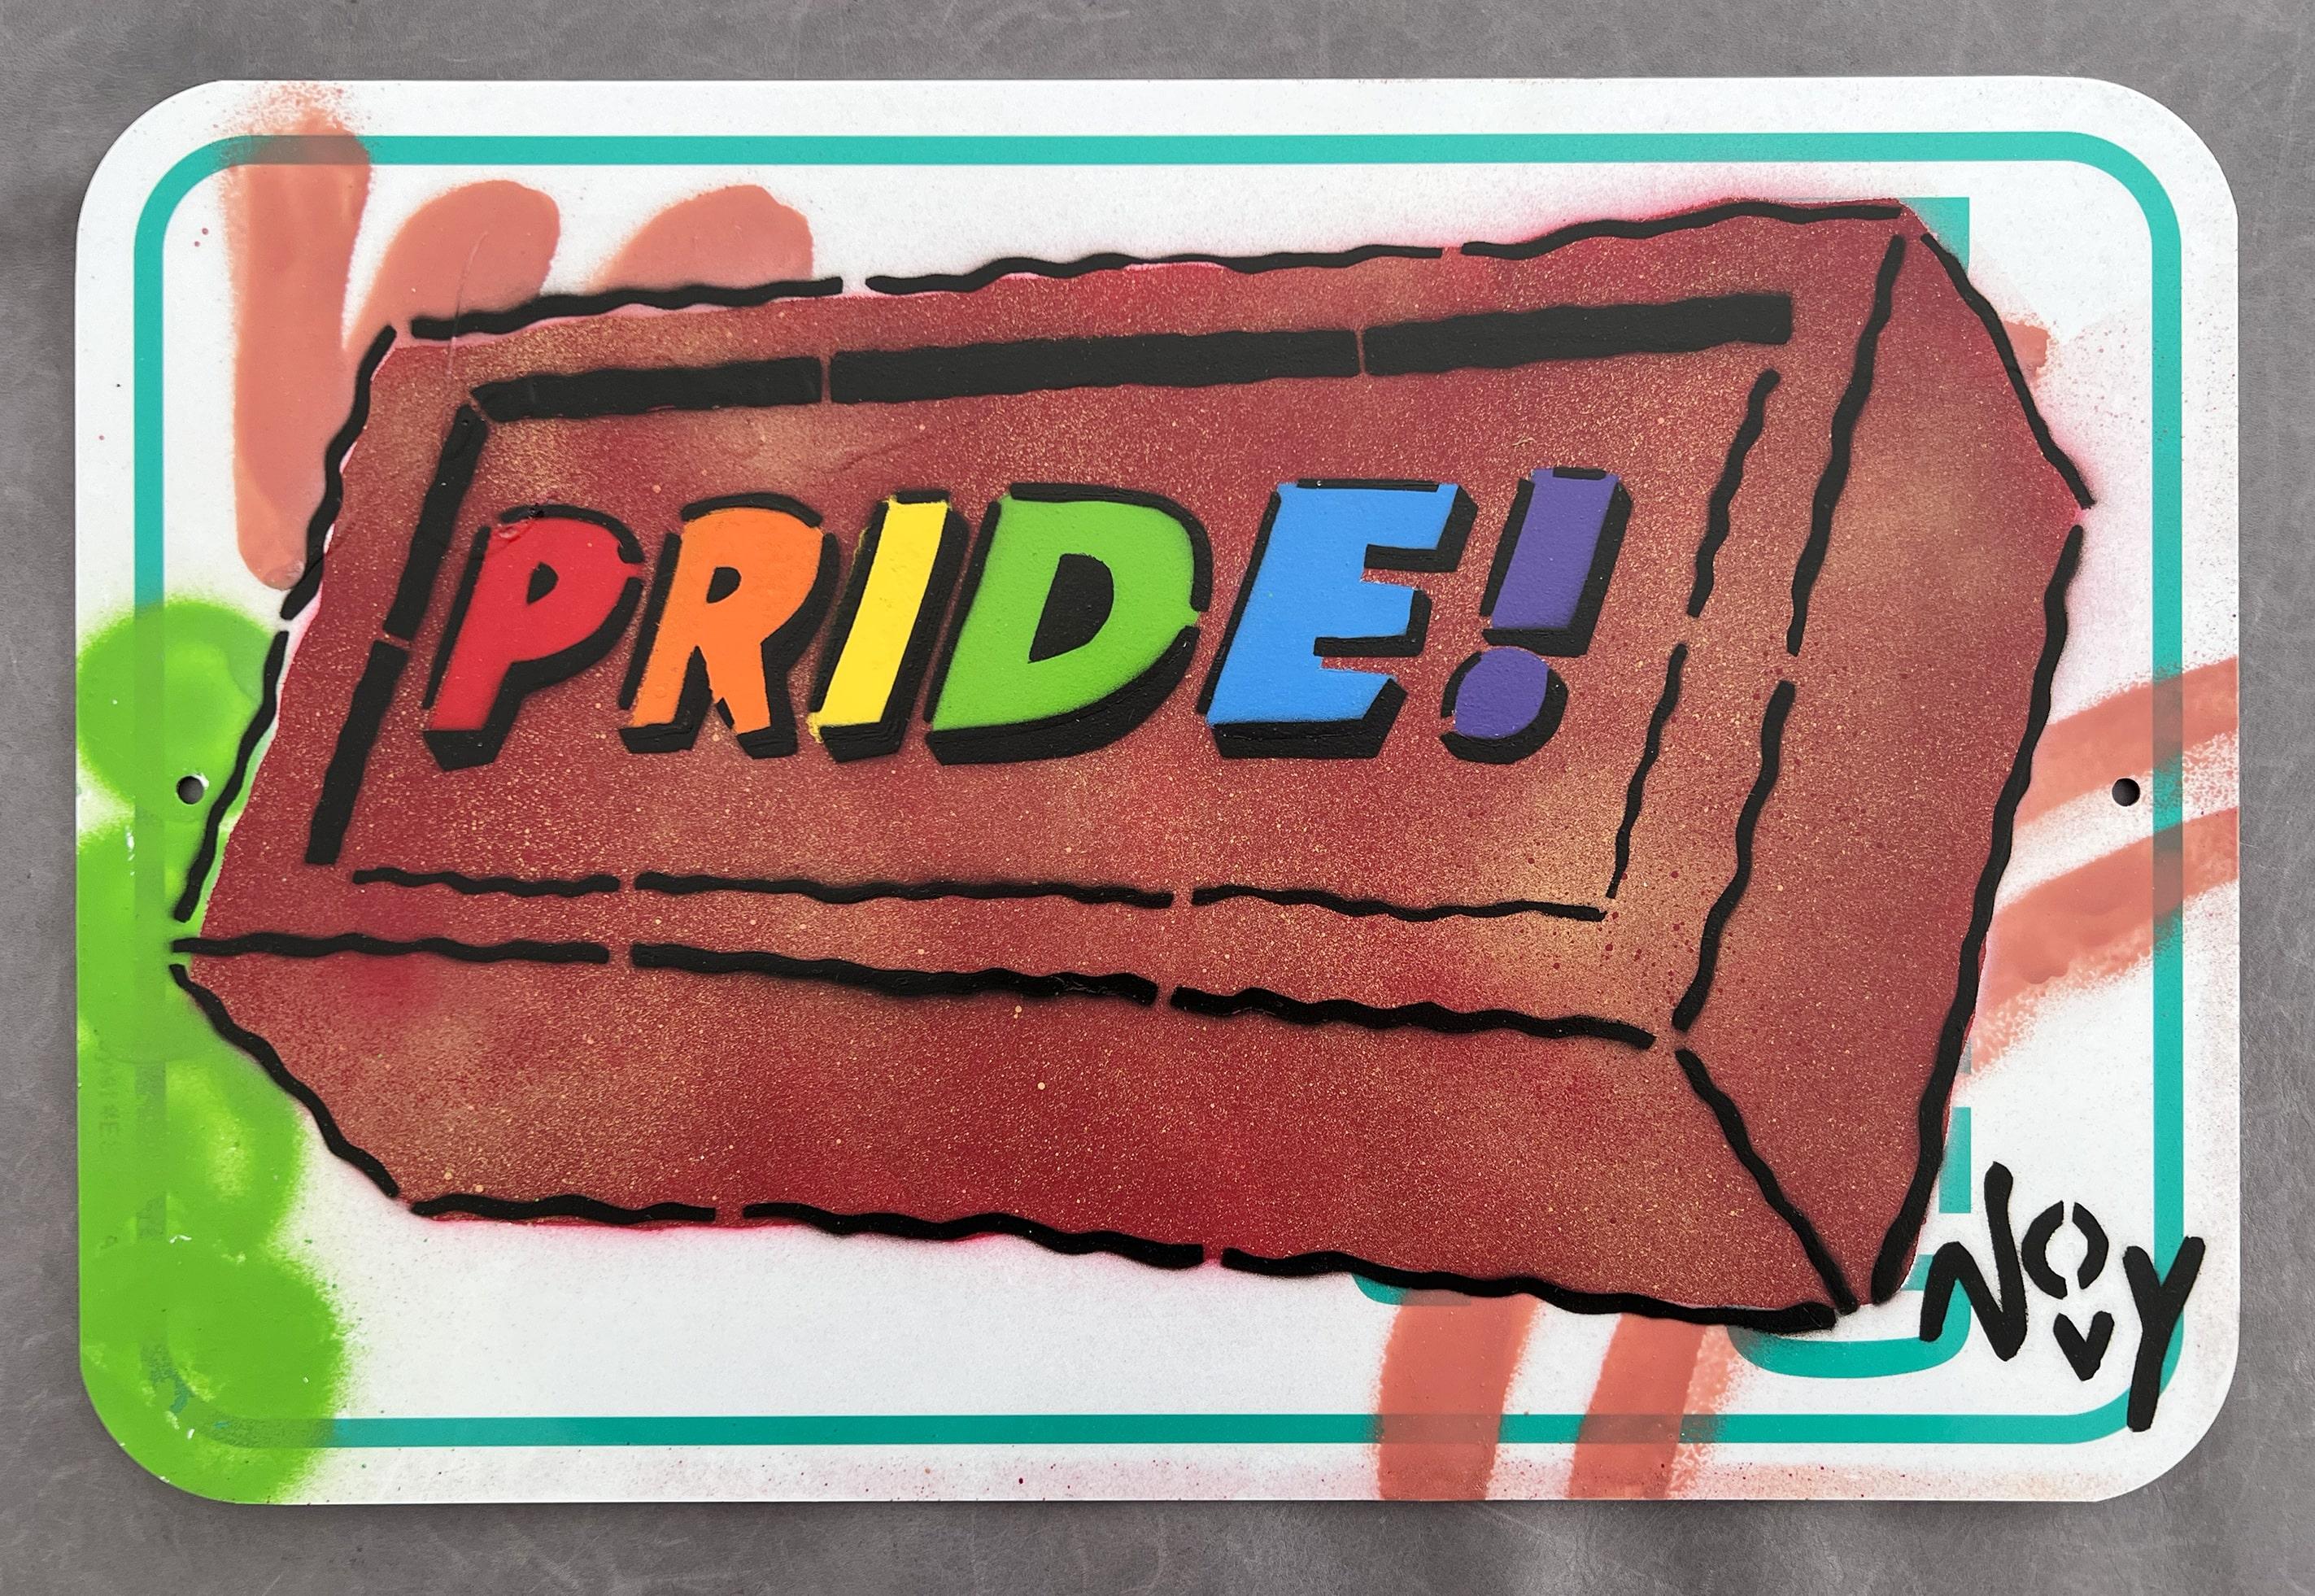 Stonewall Riots (NYC 1969) - Queer Street Art Stonewall Riots Sign - Painting by Jeremy Novy